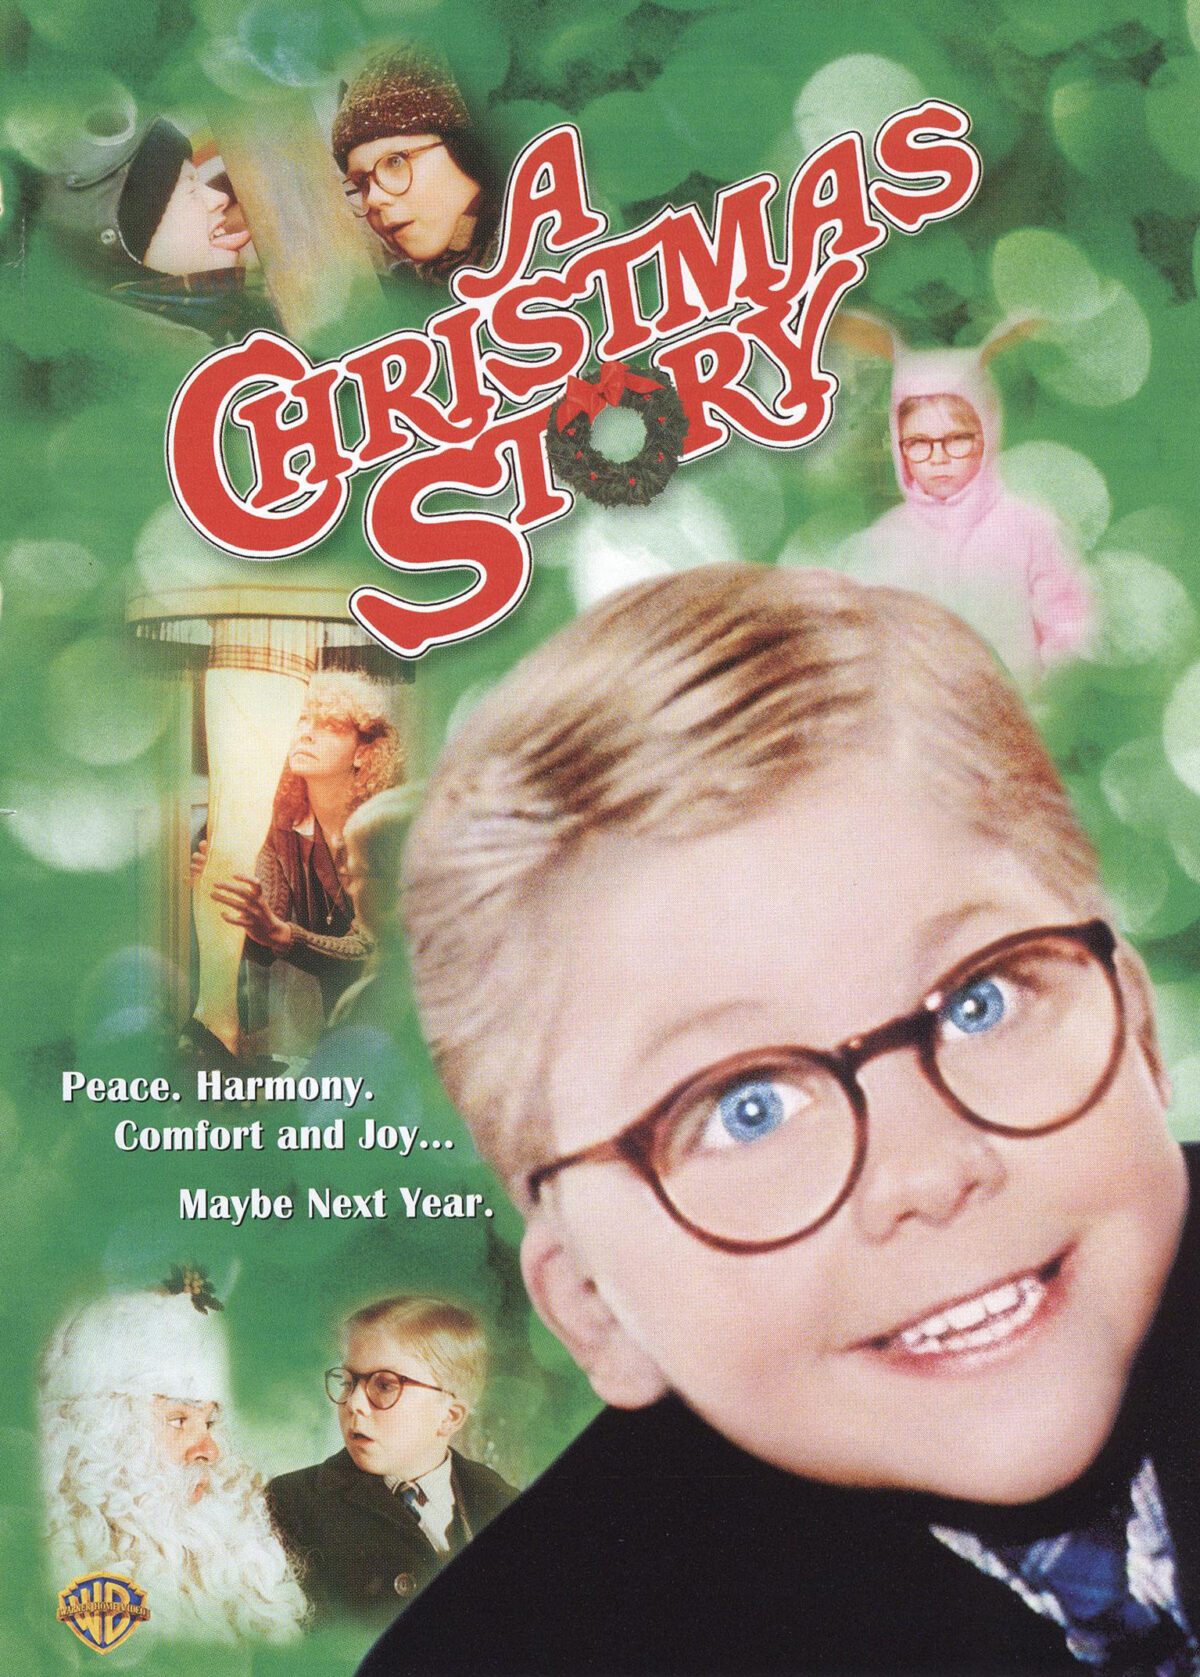 The movie poster for A Christmas Story featuring the actors.